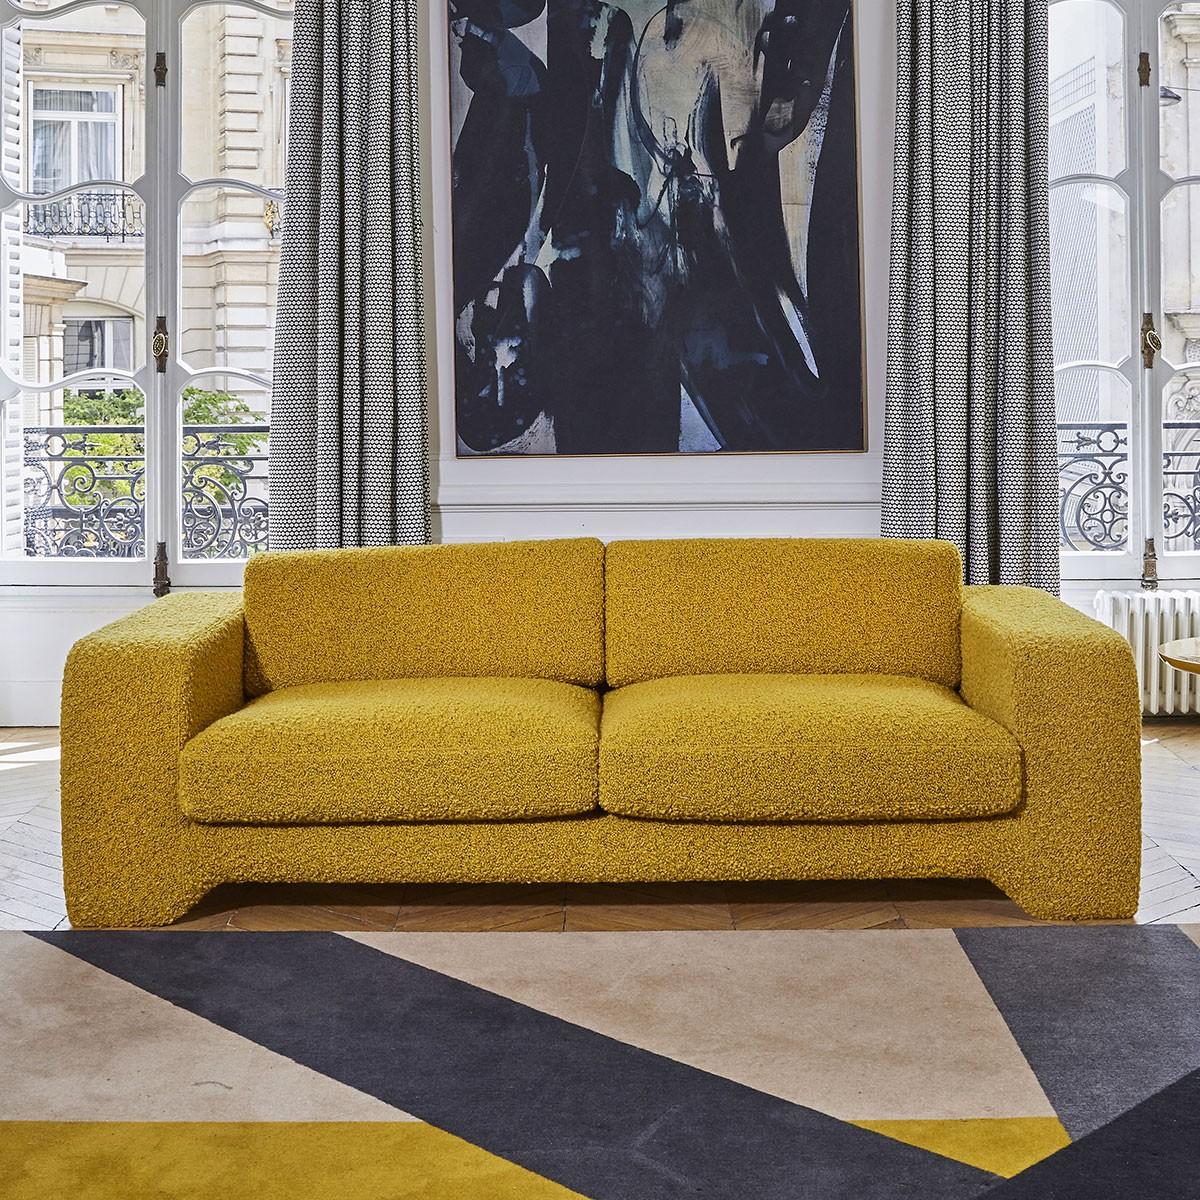 Popus editions Giovanna 4 seater sofa in almond green como velvet upholstery.

Giovanna is a sofa with a strong profile. A sober, plush line, with this famous detail that changes everything, so as not to forget its strength of character and this